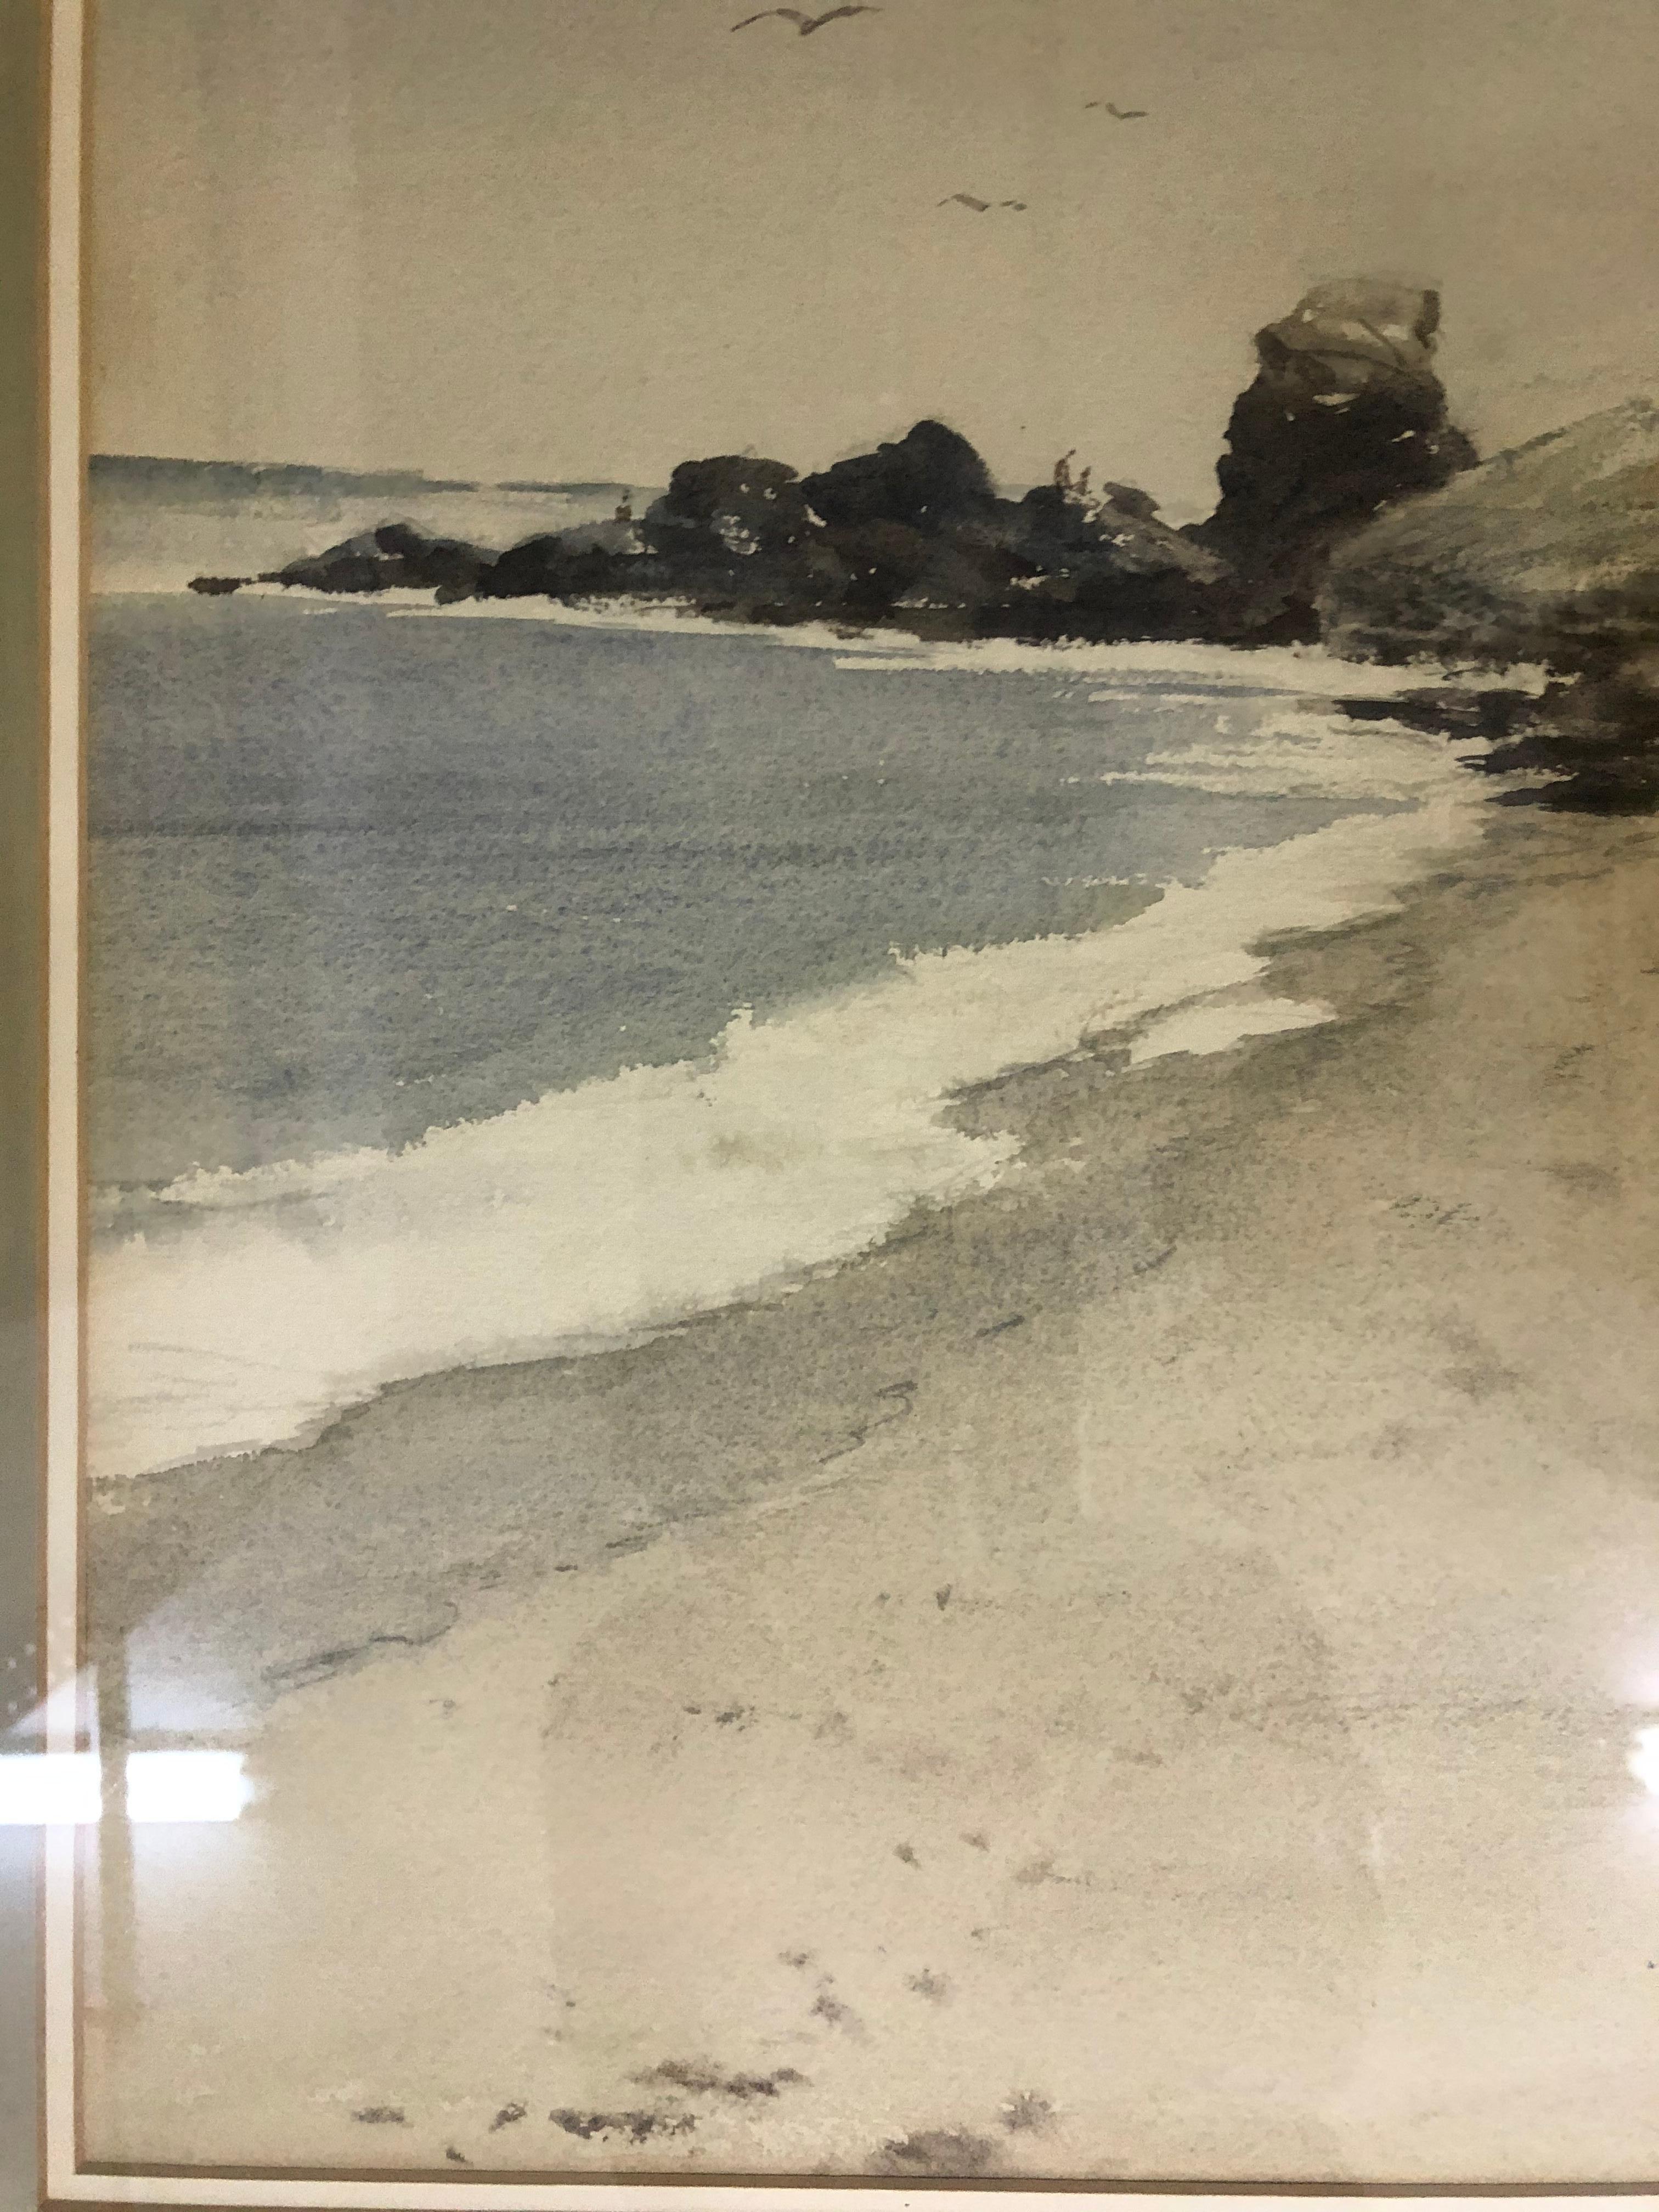 Charles Kinghan: 1895-1984. Unlisted American artist with auction results over $2100. That’s fantastic watercolor of a beach in Corona Del Mar California was probably done mid 20th century. It measures approximately 21 inches wide by 14 inches high.